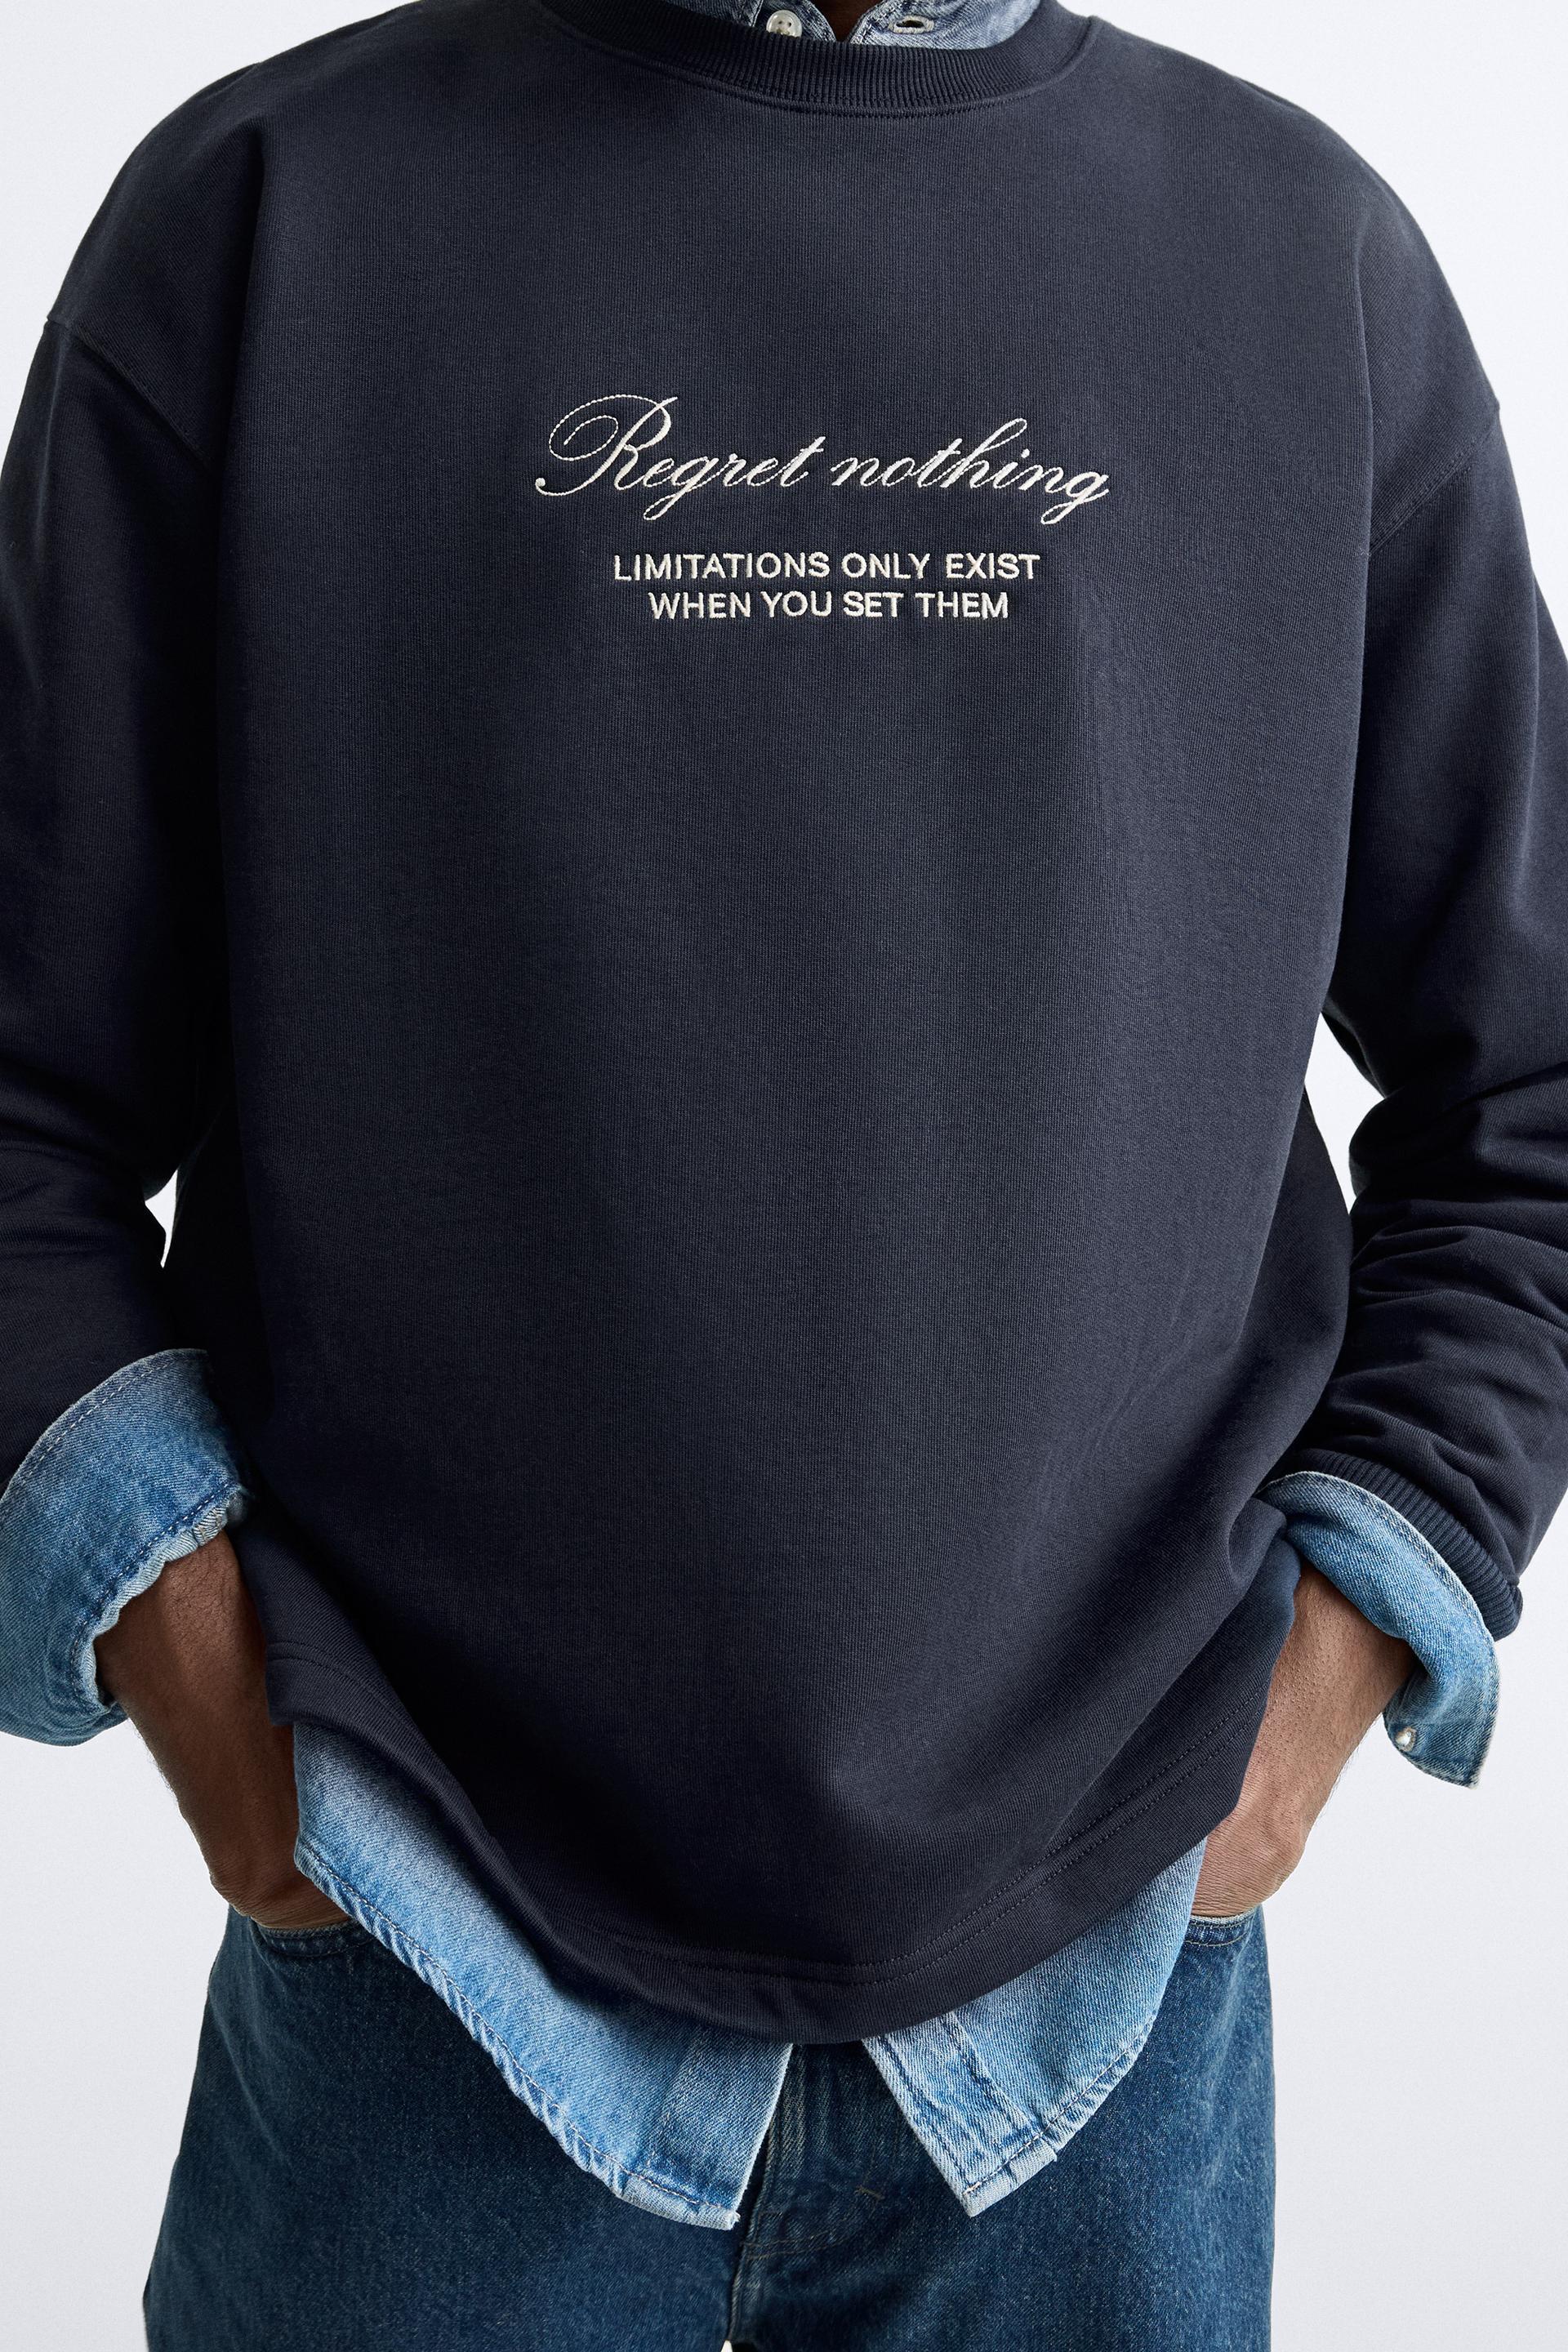 From Newark With Love Embroidered Sweatshirt (Navy Blue)